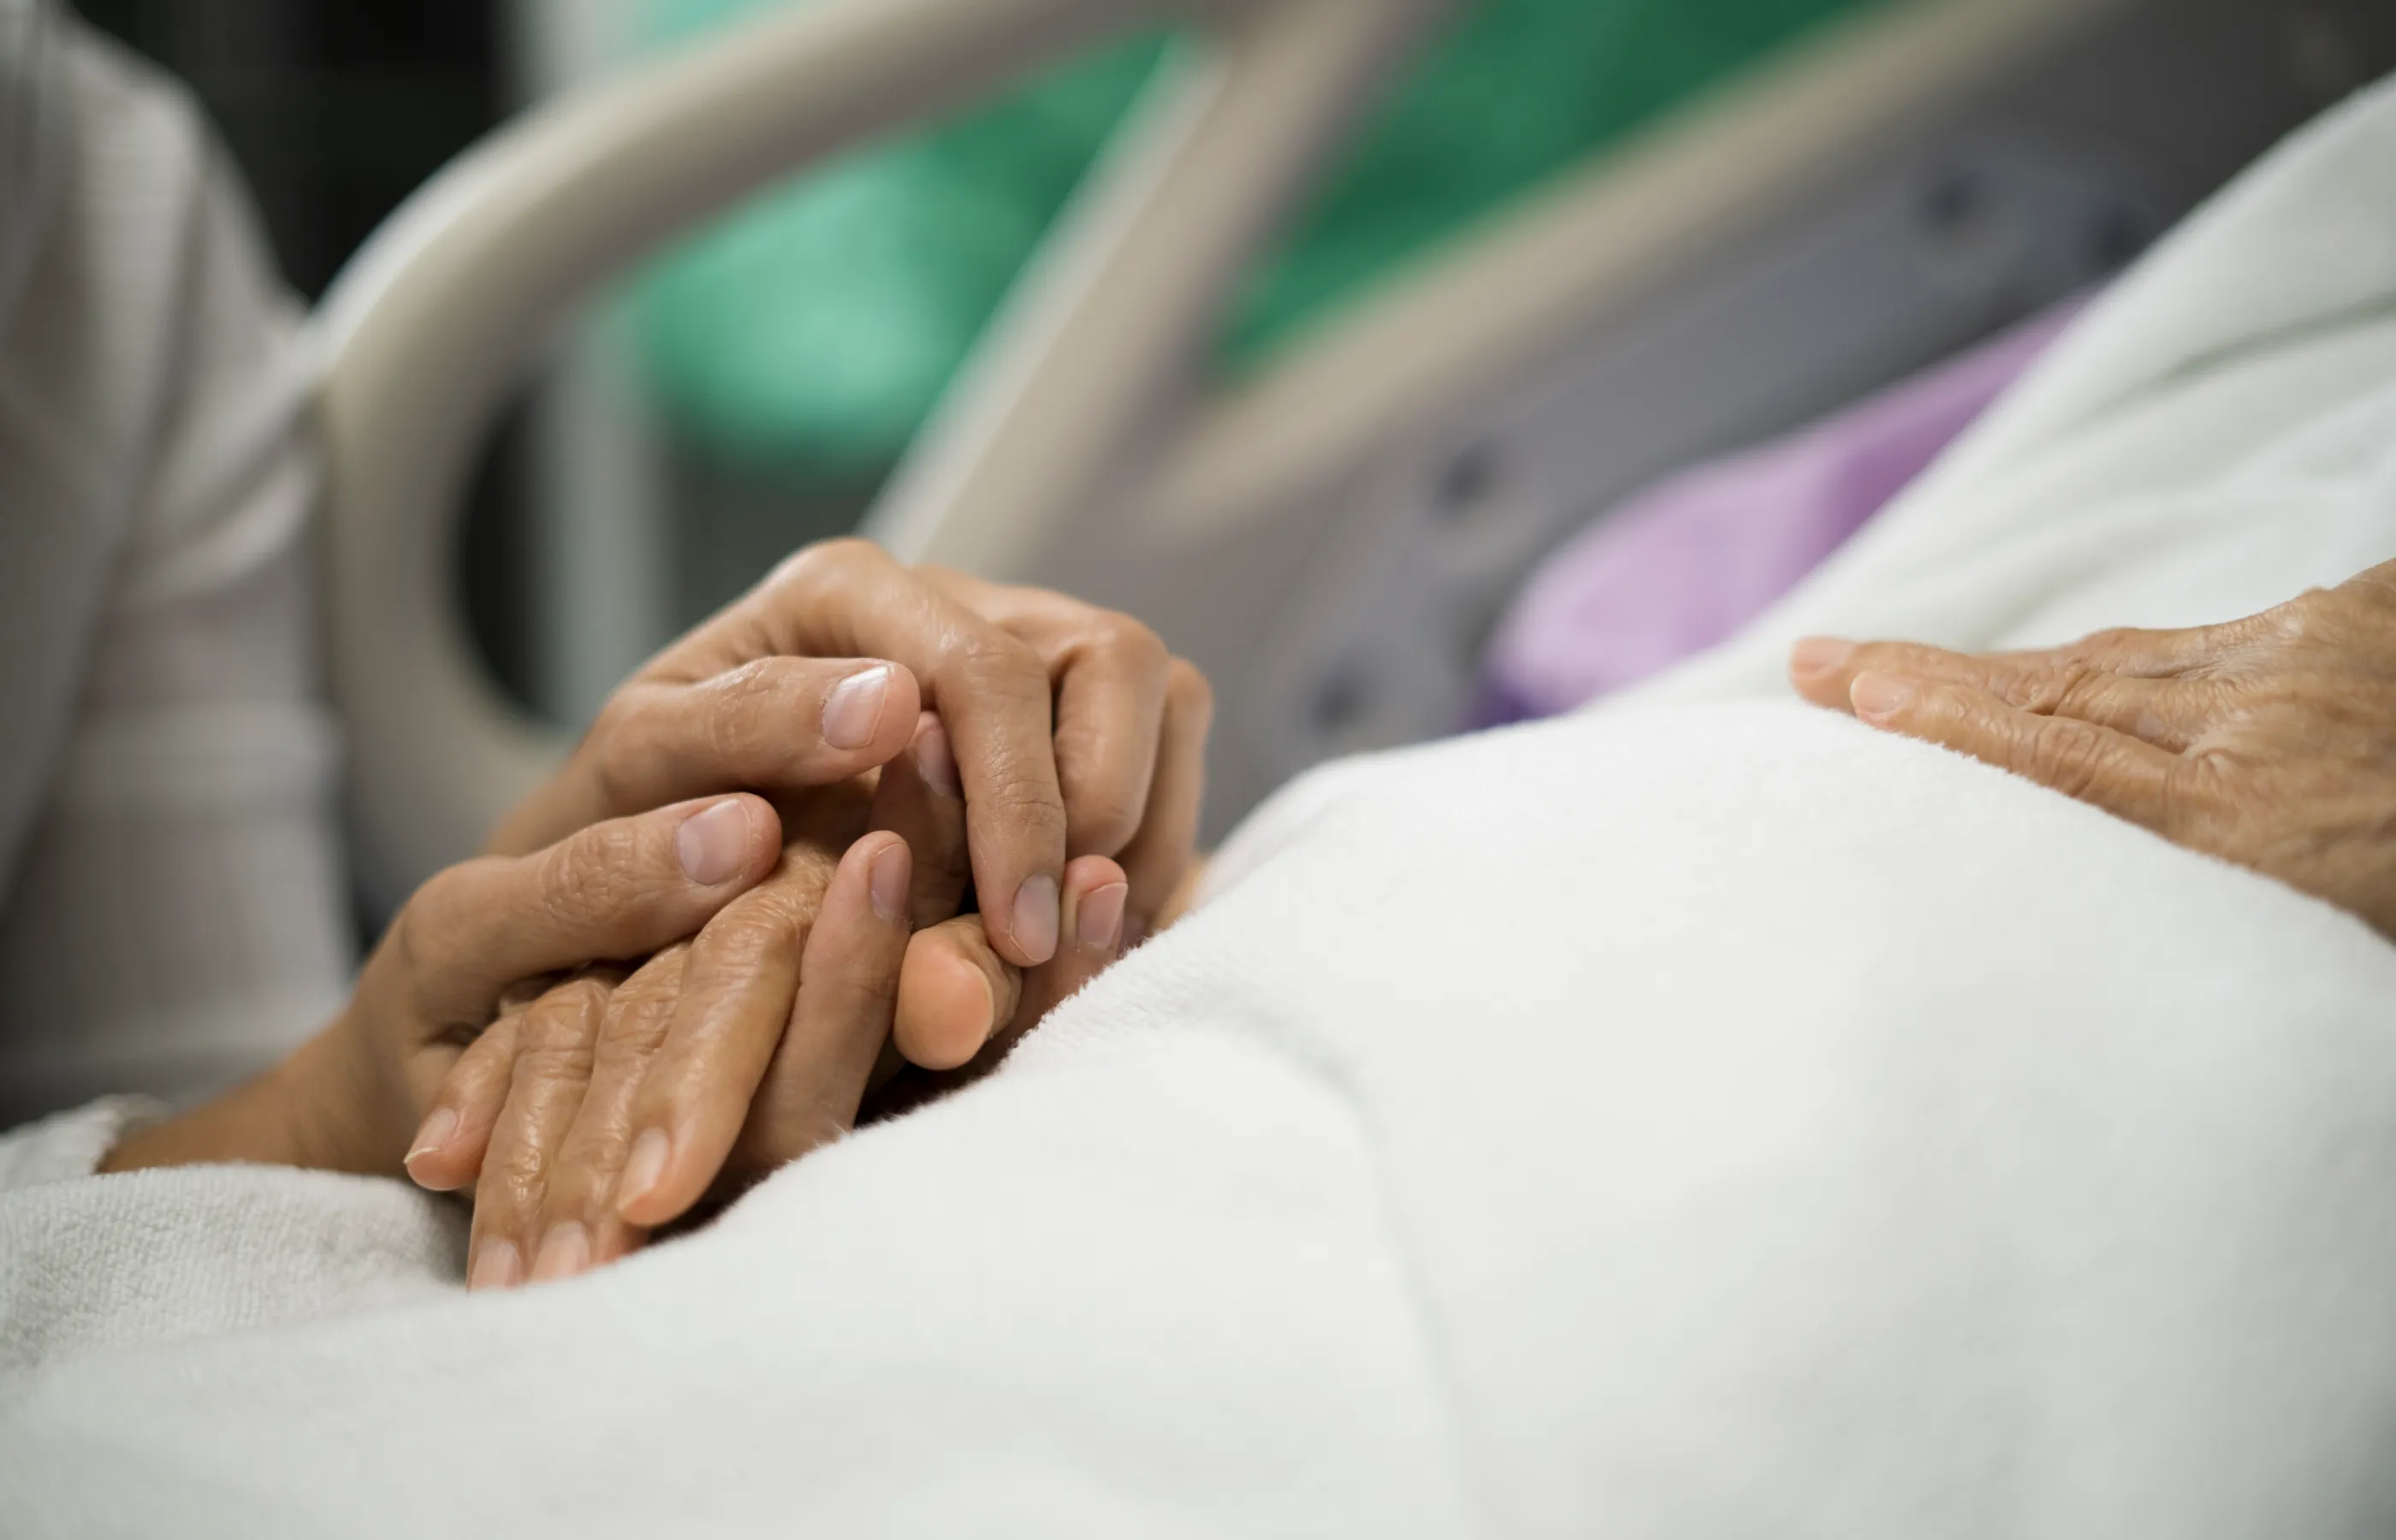 Patient in hospital bed with visitor bed side. Visitors' hands are covering the patients hands in support. 